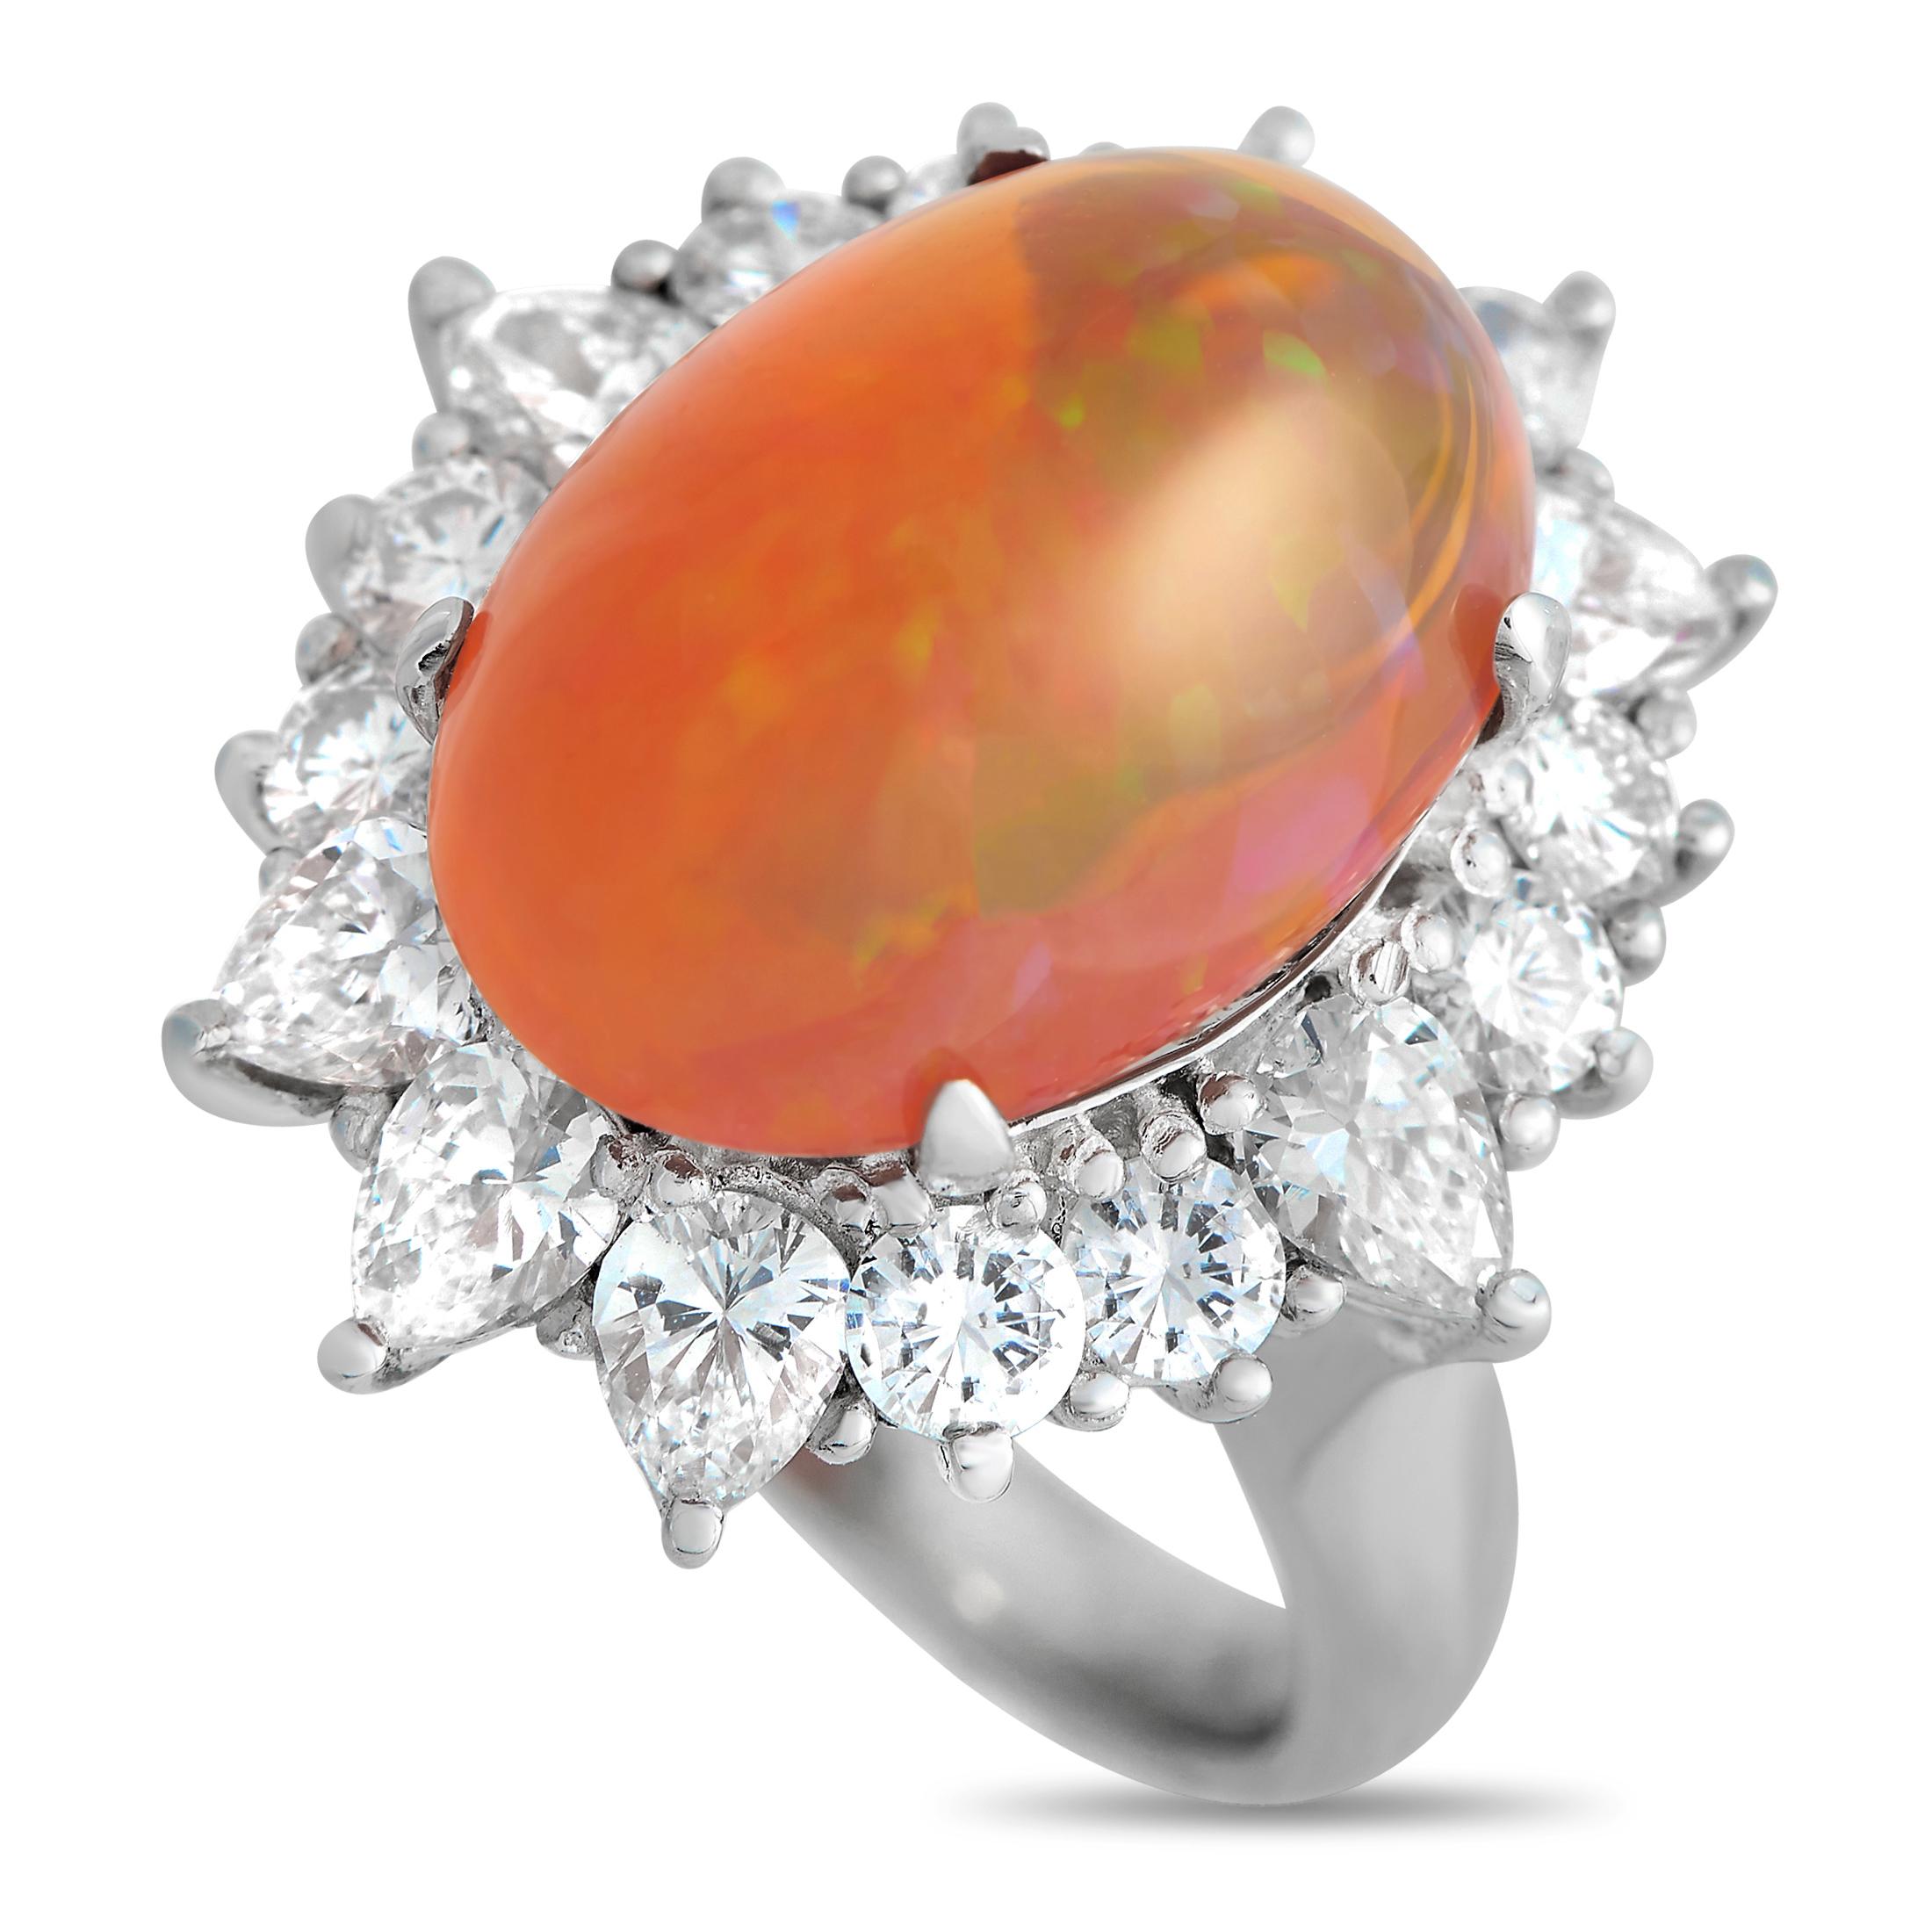 A breathtaking orange-hued 7.19 carat opal is surrounded by a halo of diamonds totaling 2.03 carats on this exquisite luxury ring. Bold and incredibly impactful, it features a shimmering platinum setting with a 4mm wide band and a 12mm top